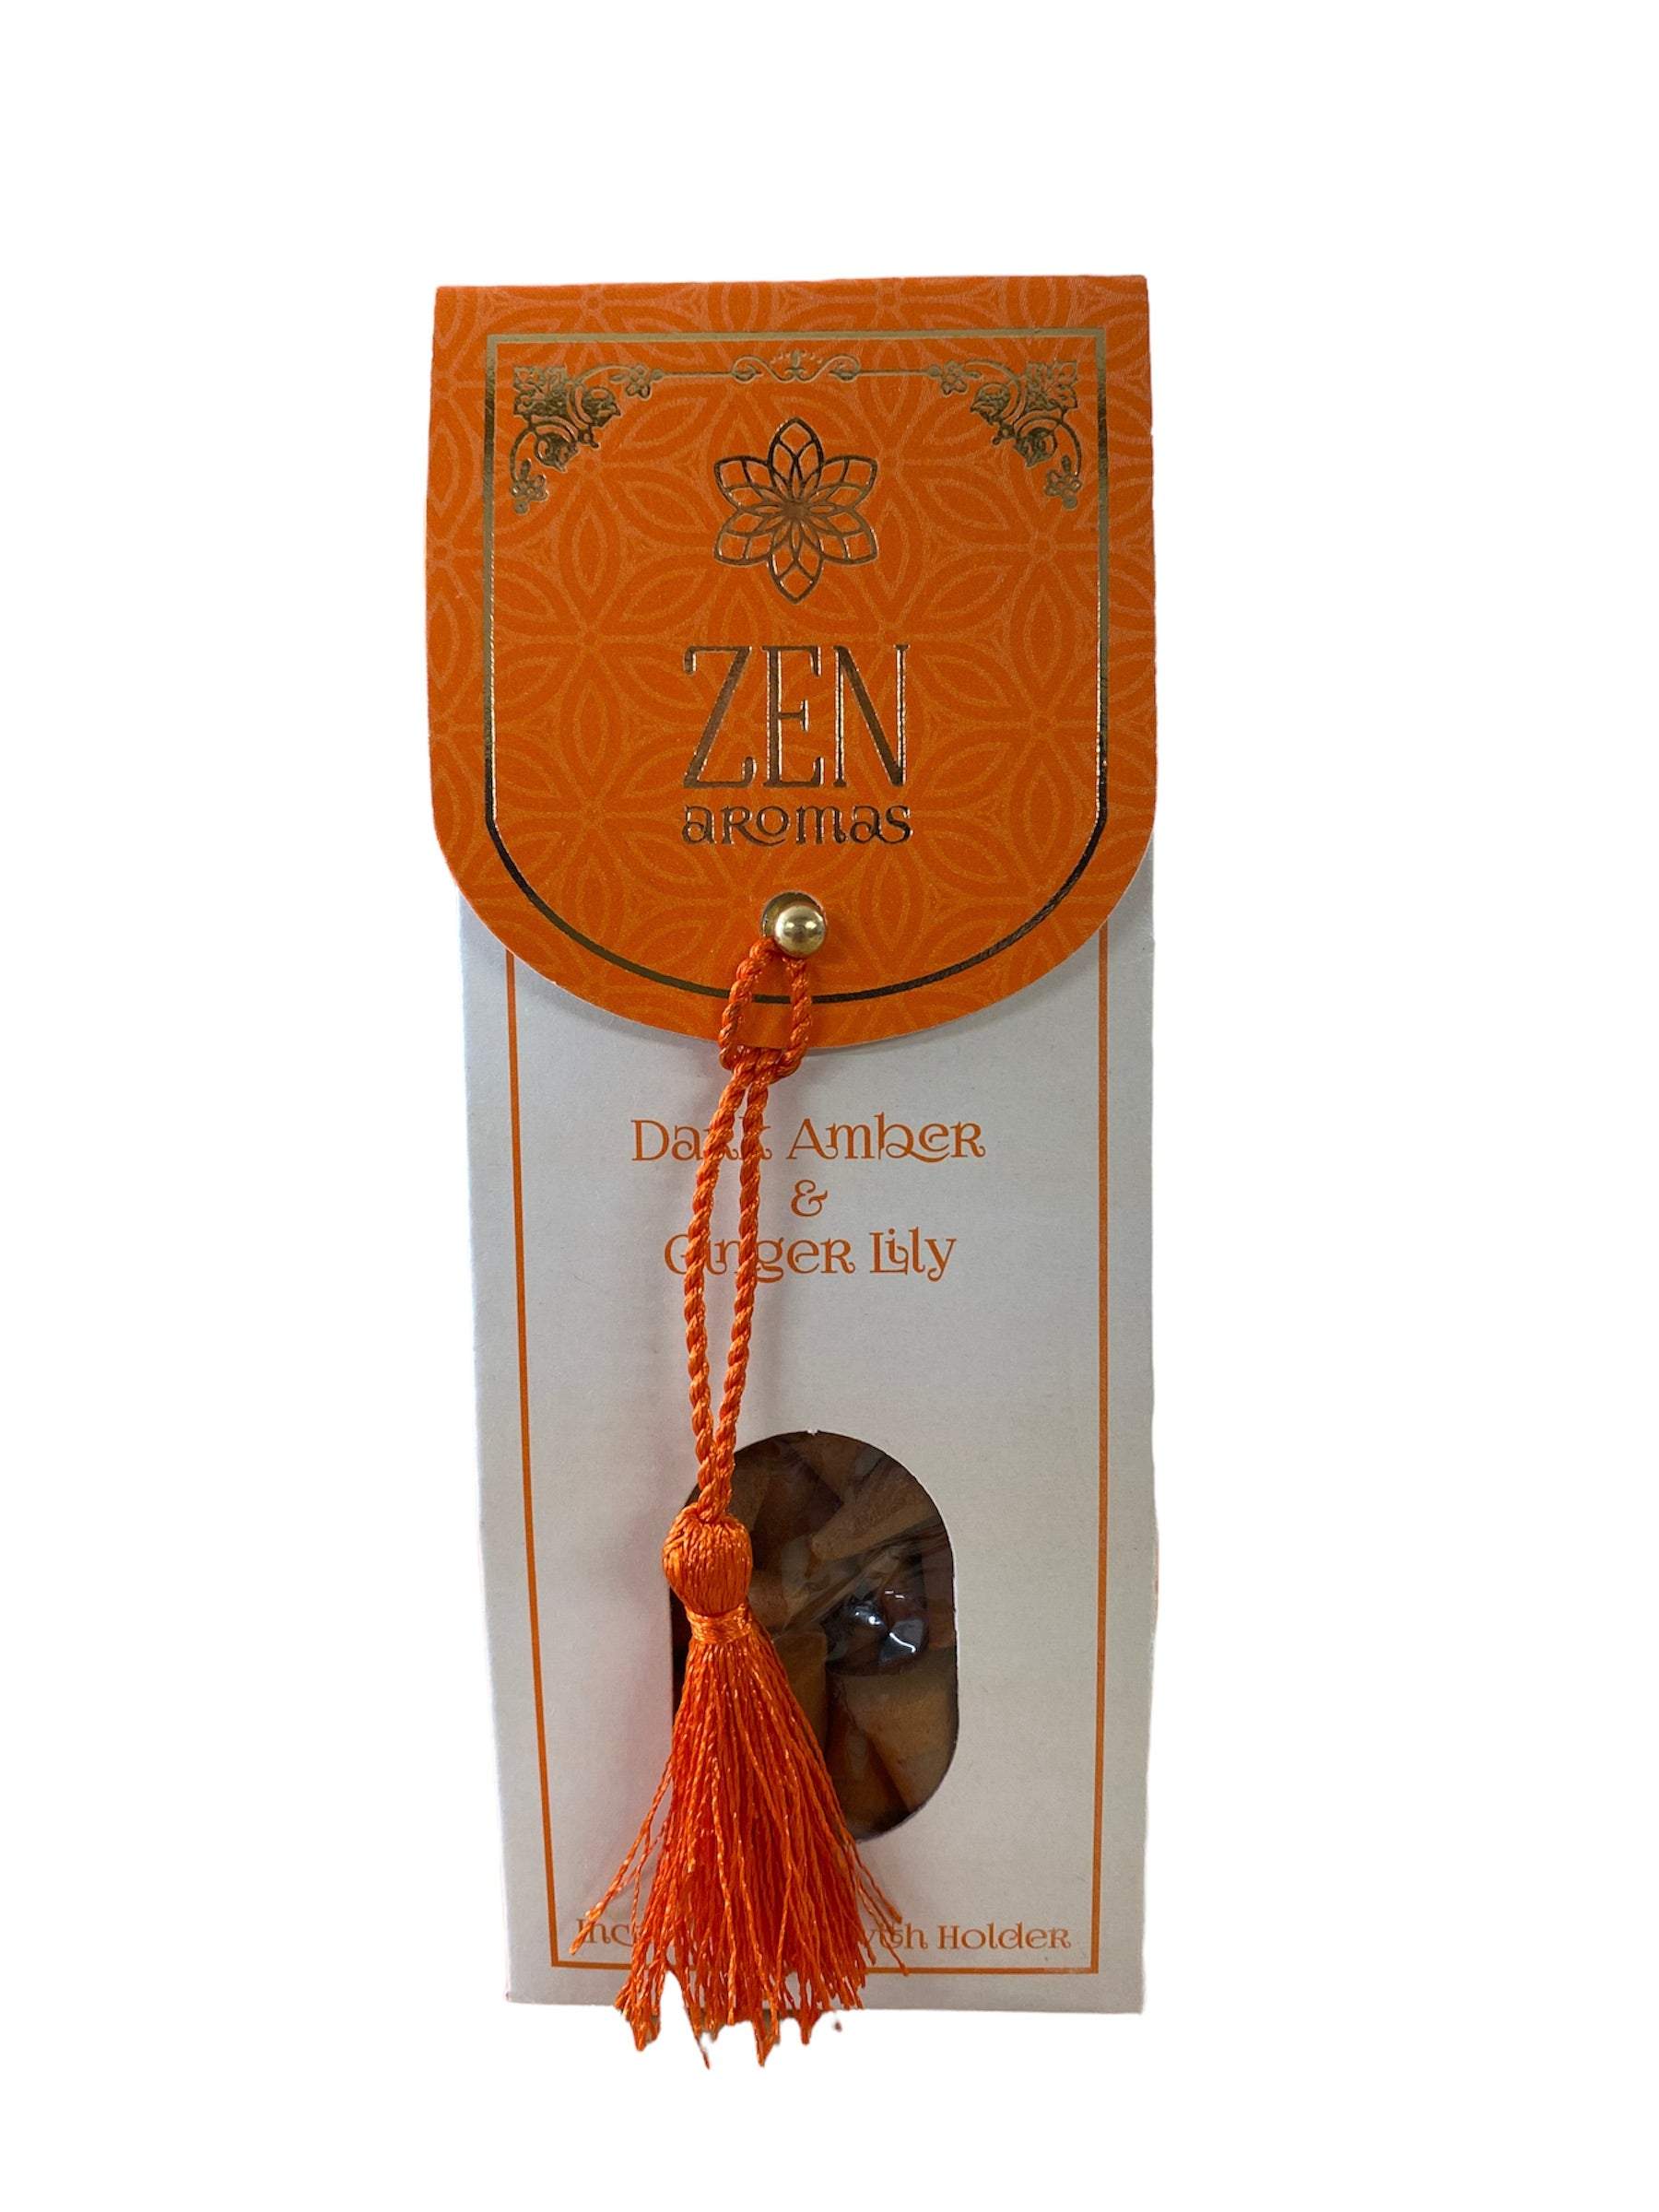 Dark Amber and Ginger Lily Zen Incense Cones-FREE Shipping over £35.00-